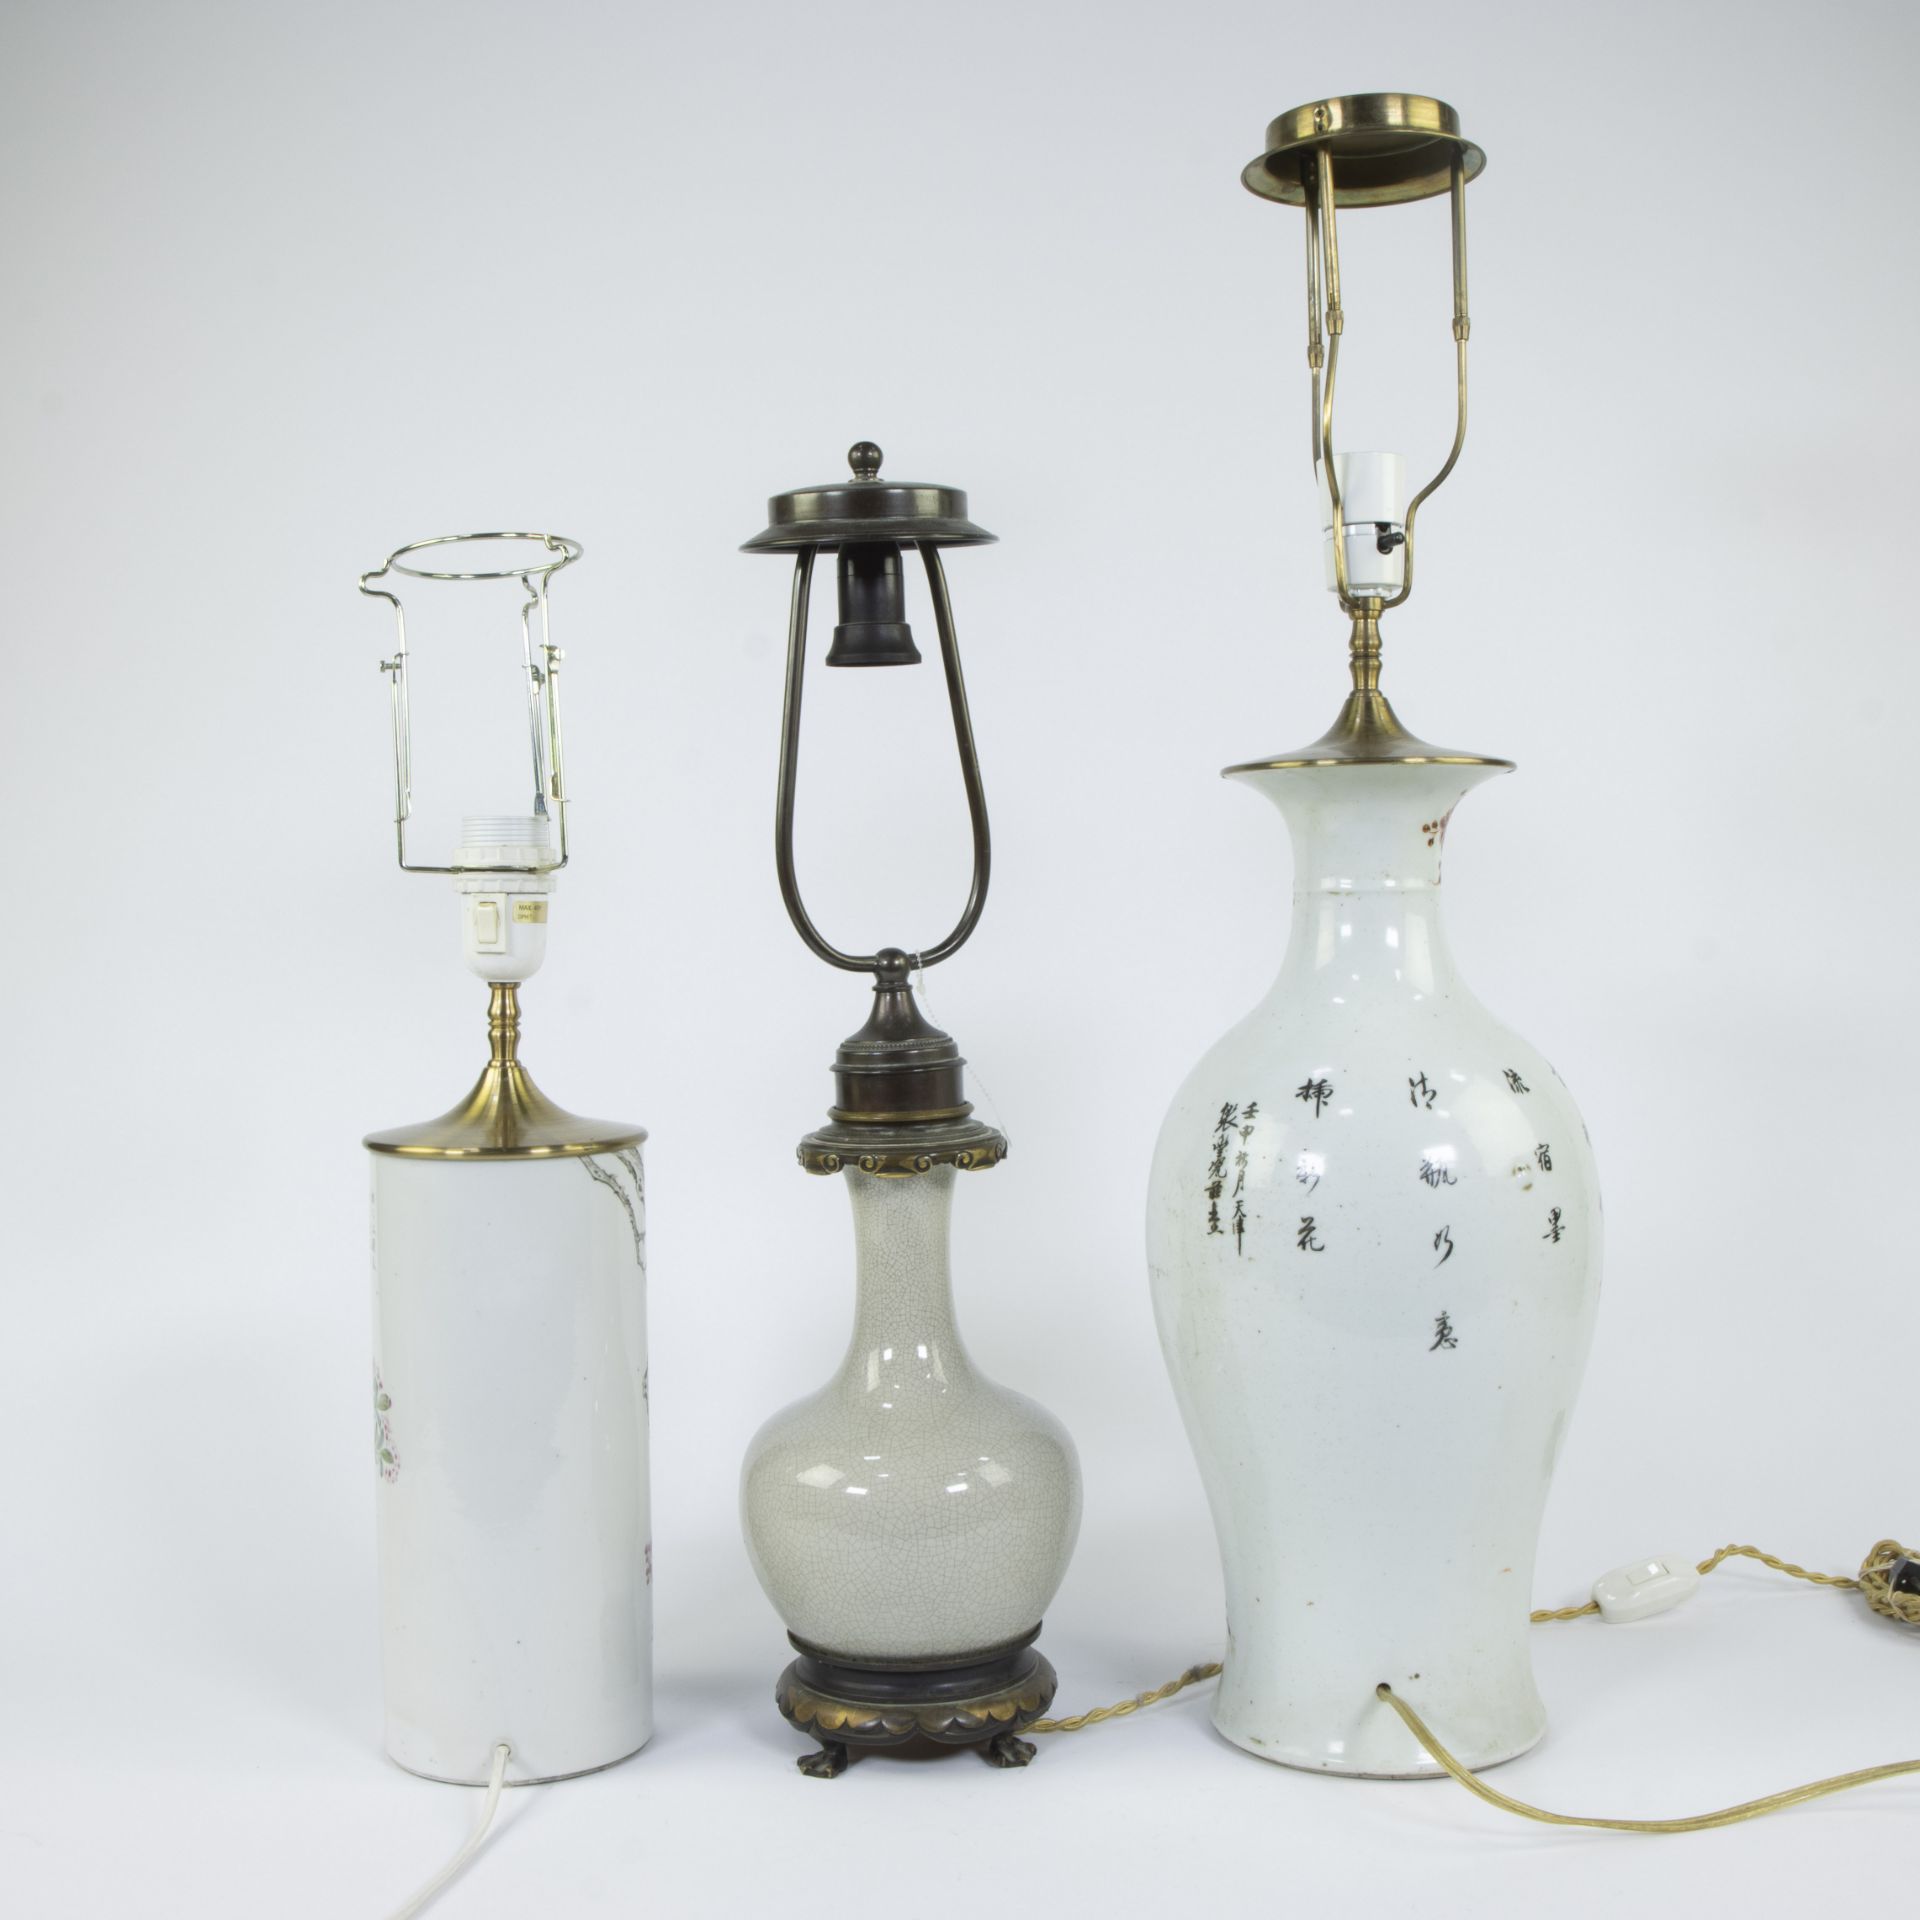 Collection of 3 Chinese vases transformed into lampadaires - Image 3 of 5